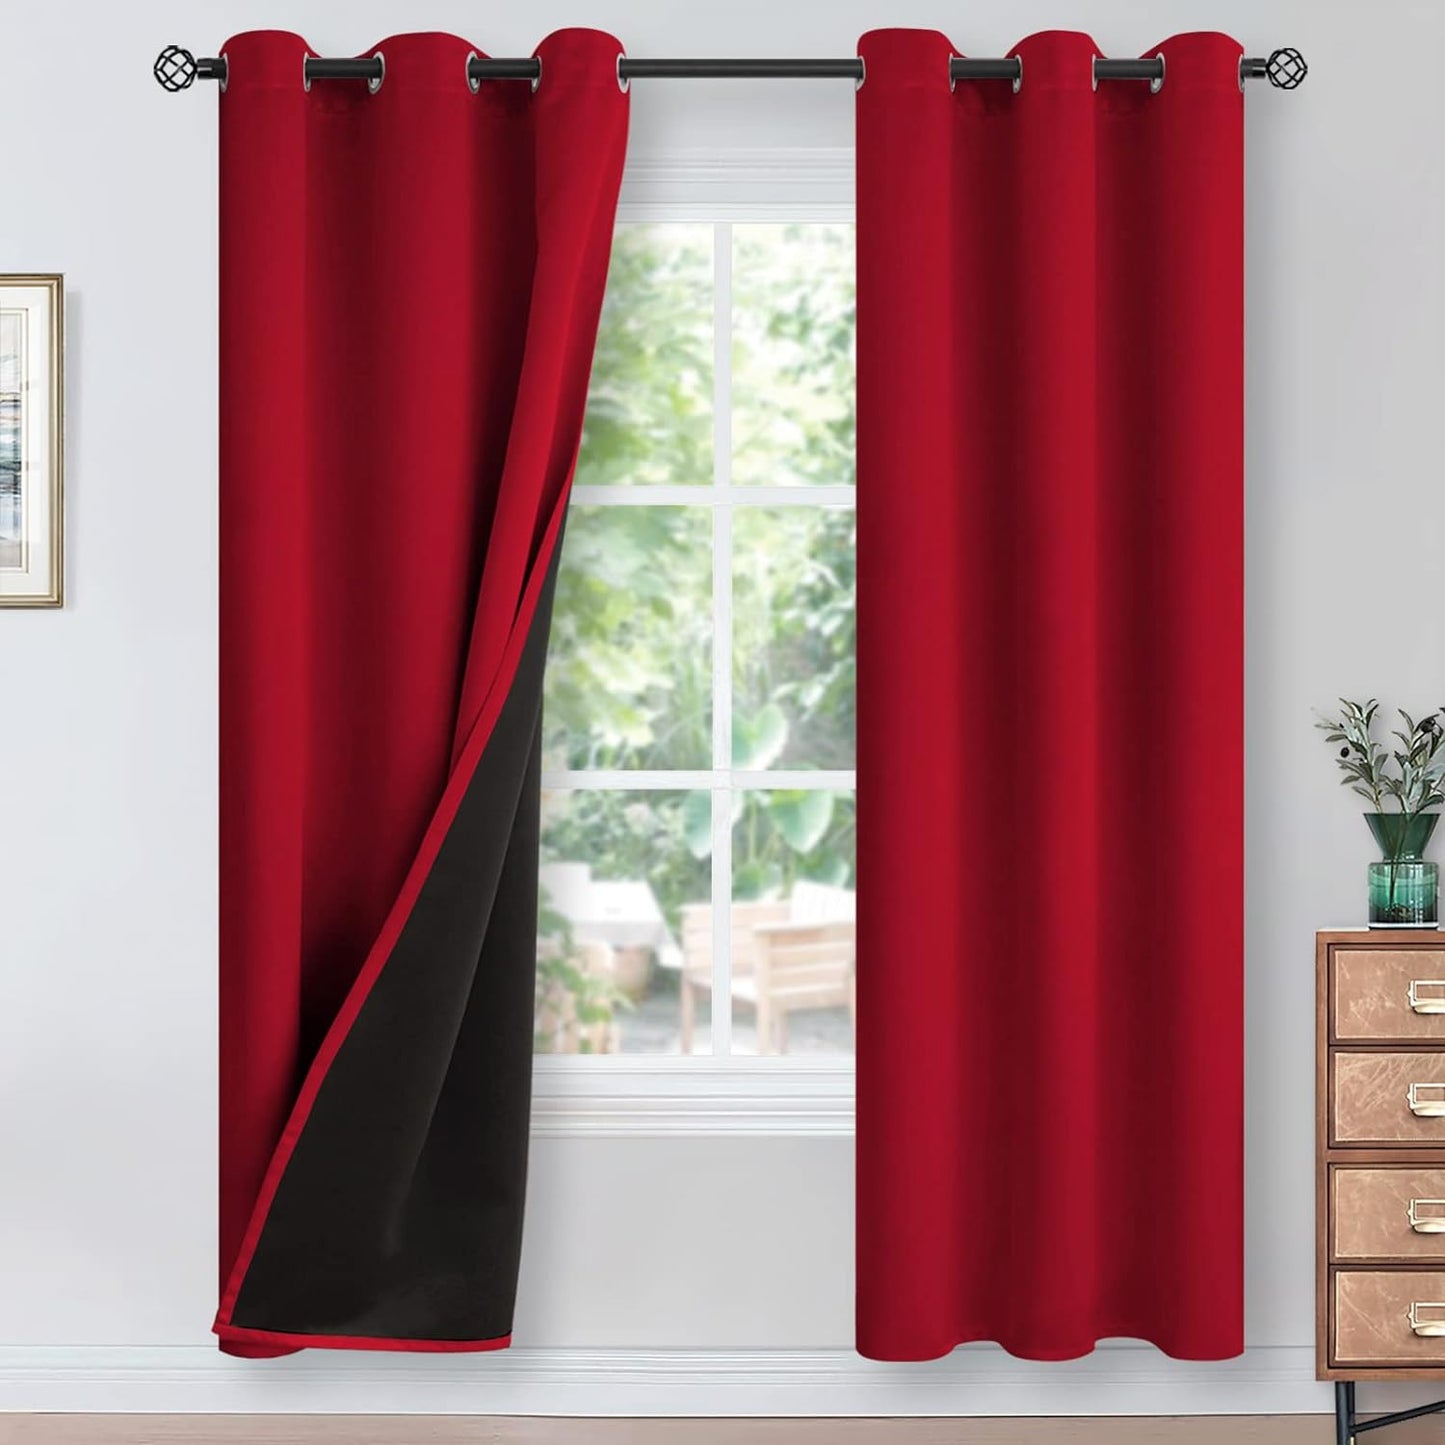 Youngstex Black 100% Blackout Curtains 63 Inches for Bedroom Thermal Insulated Total Room Darkening Curtains for Living Room Window with Black Back Grommet, 2 Panels, 42 X 63 Inch  YoungsTex Red 42W X 84L 